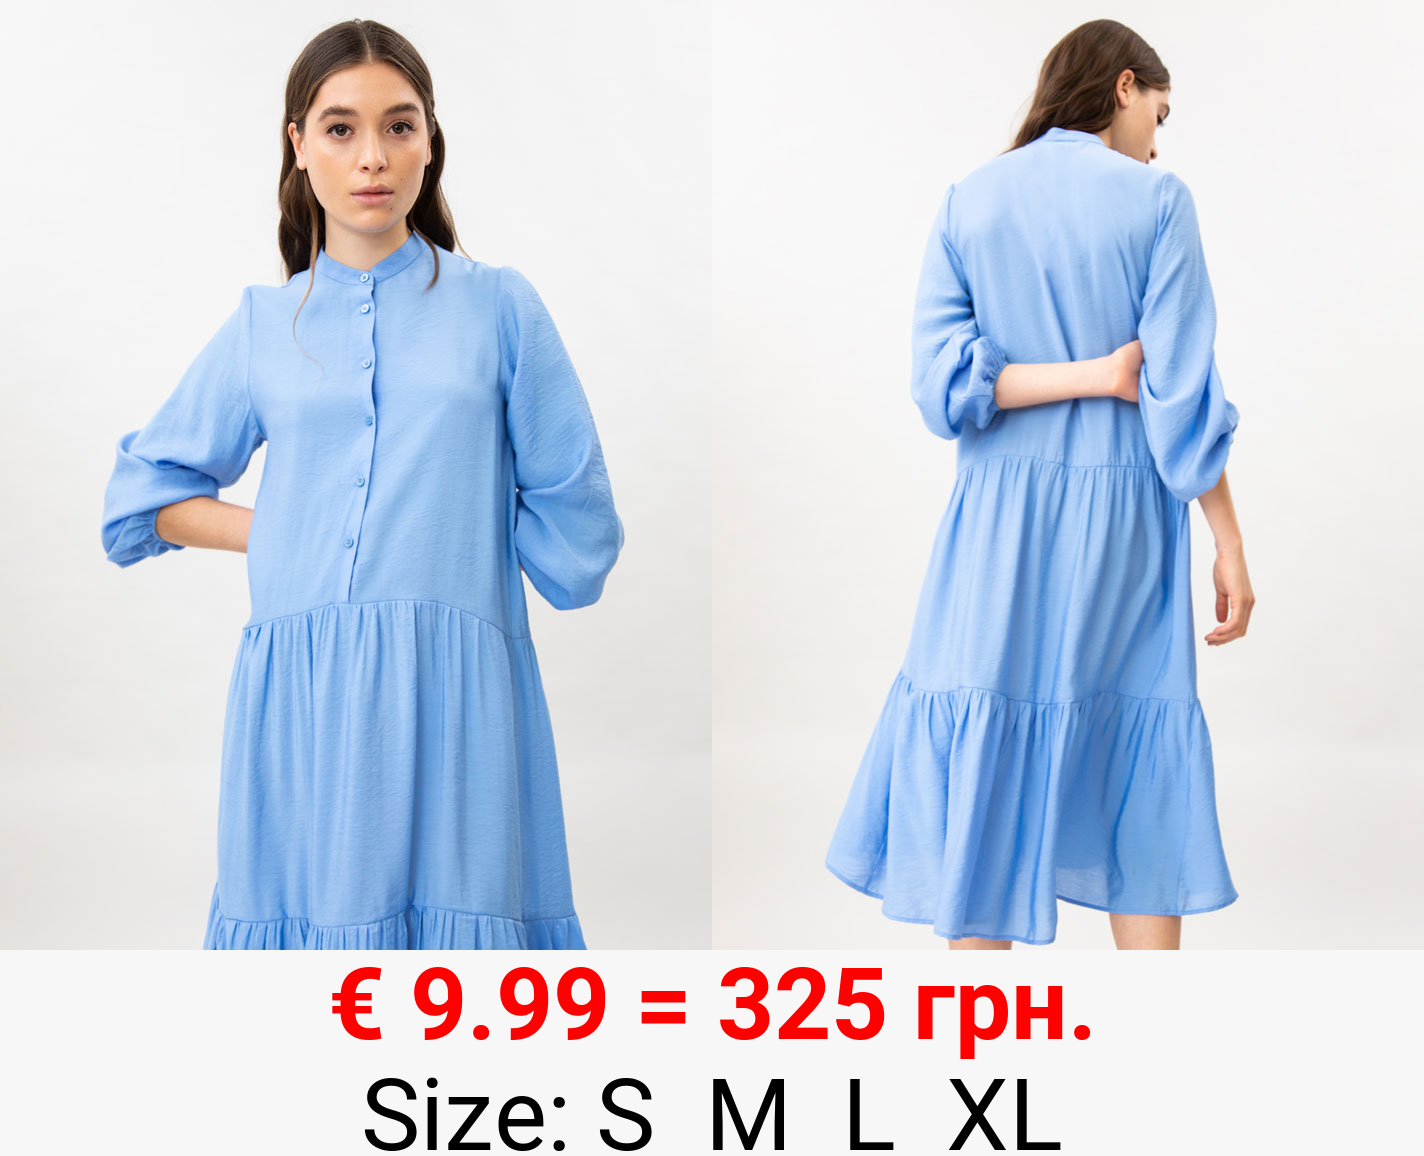 Midi dress with stand-up collar